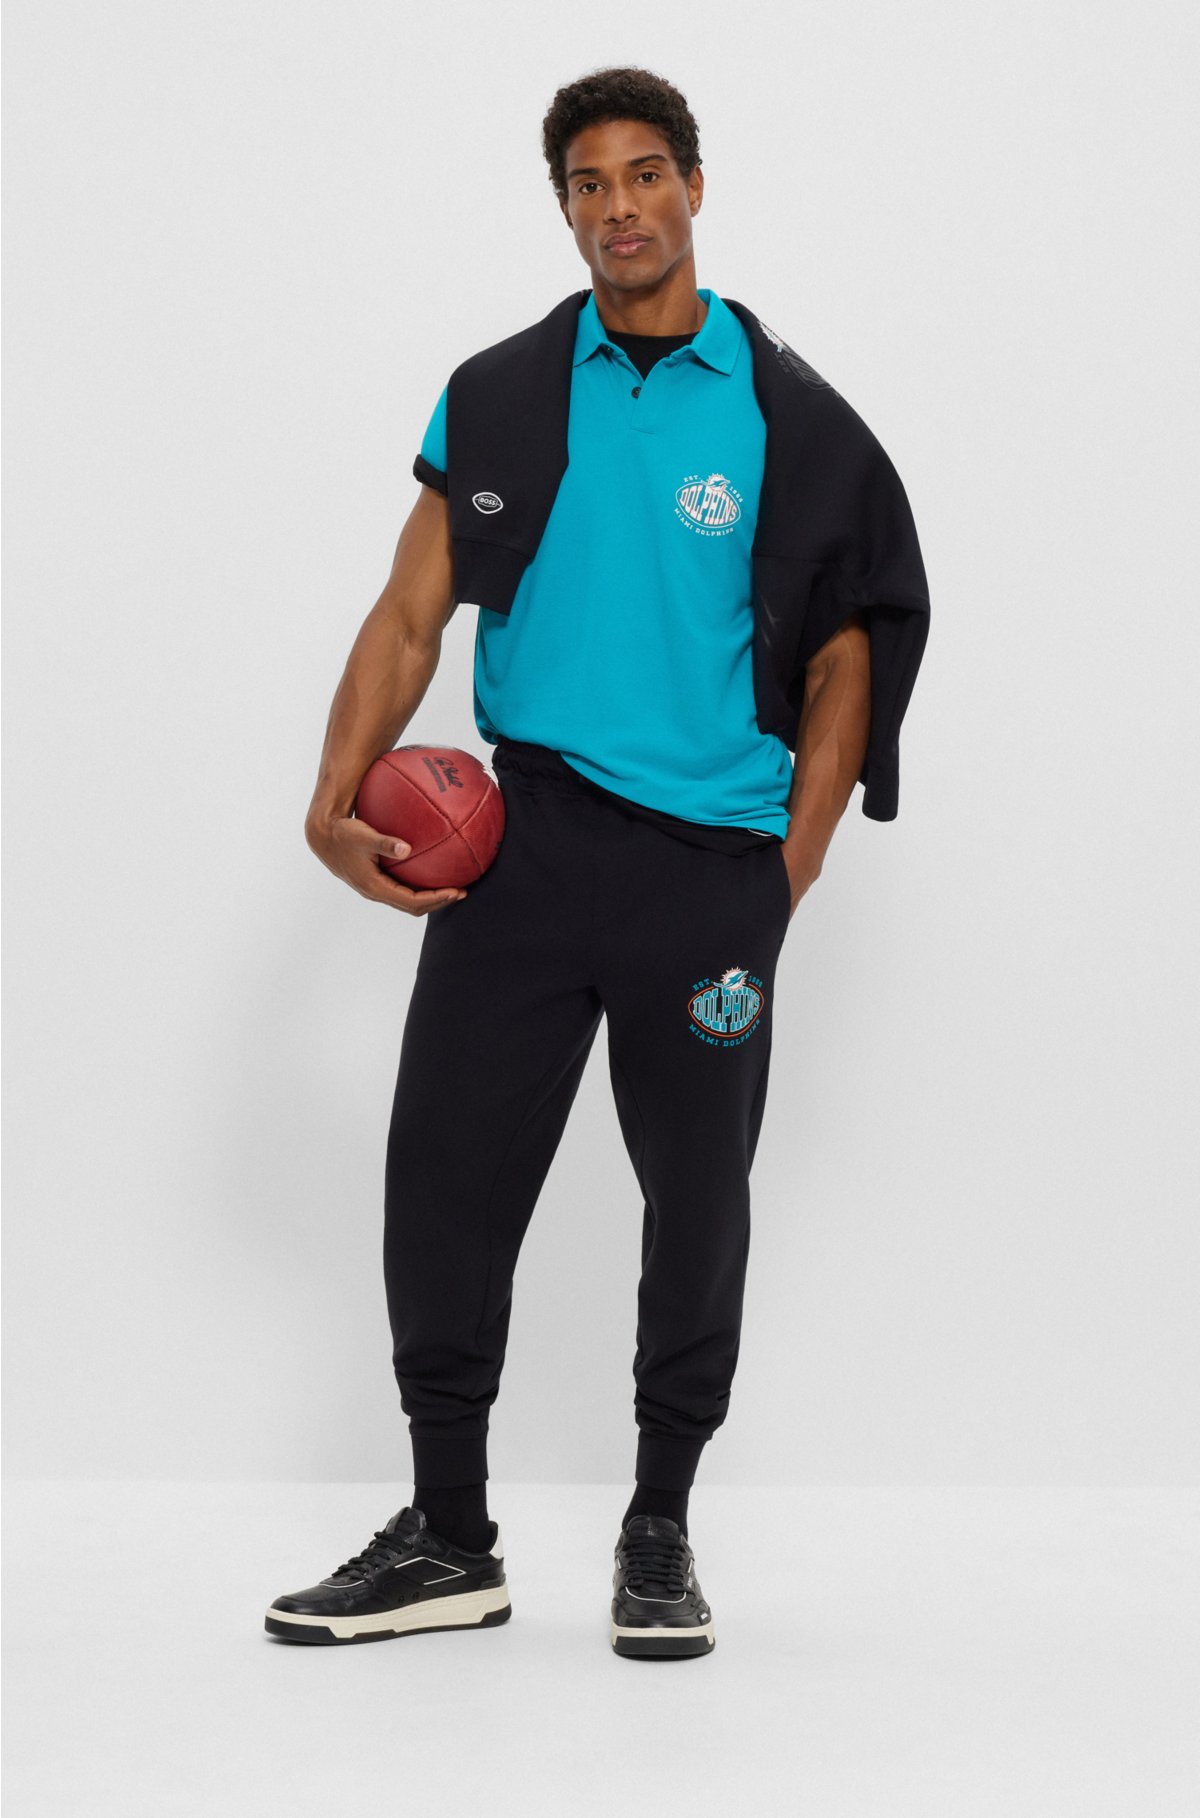 BOSS x NFL cotton-piqué polo shirt with collaborative branding, Dolphins